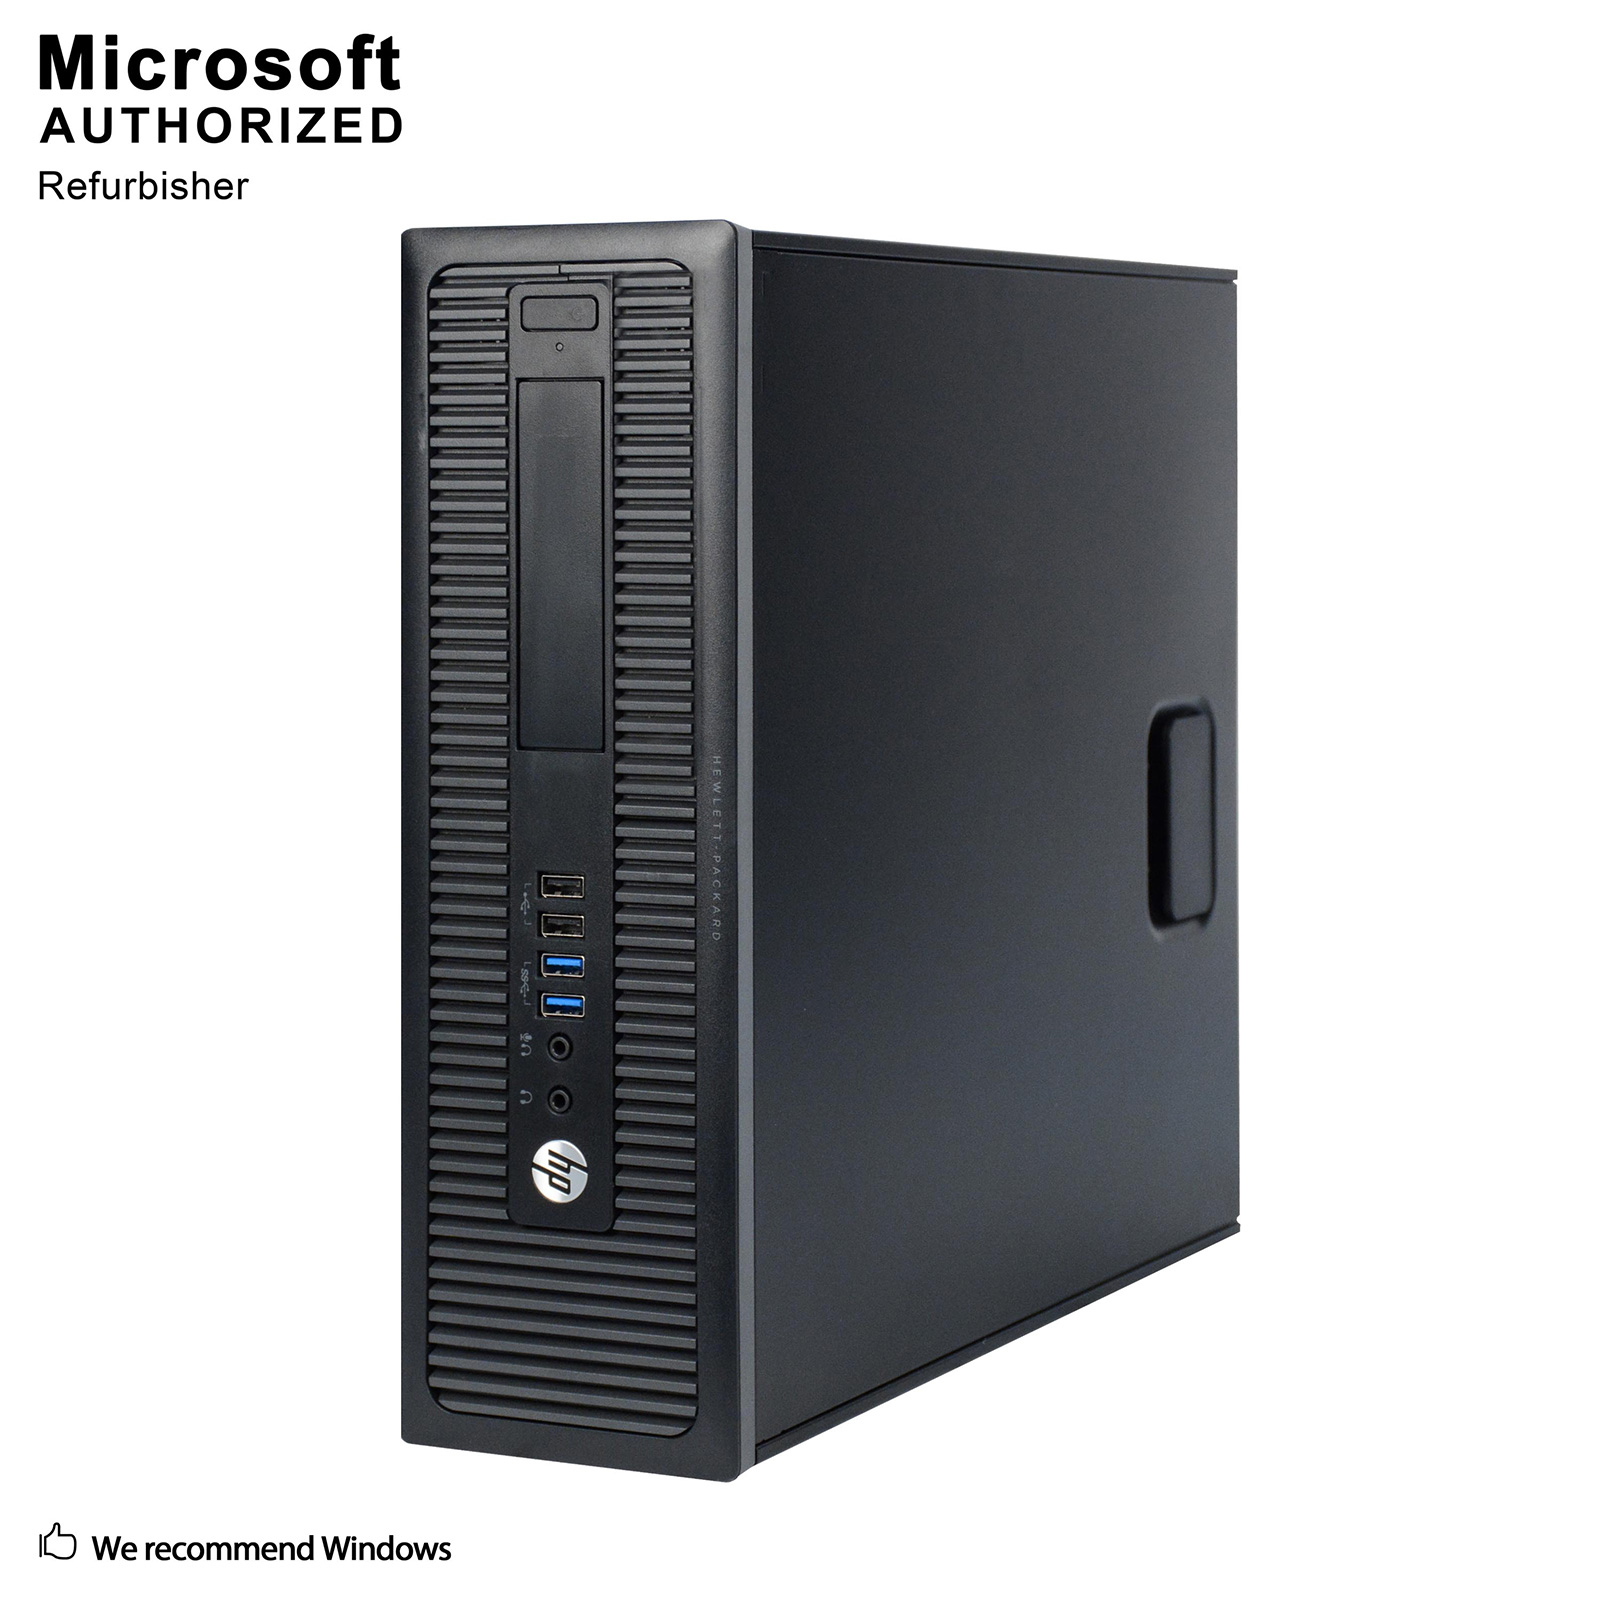 HP ProDesk 600 G1 SFF Desktop PC Intel Quad Core I5-4590 3.3Ghz, 16G DDR3, 1T SSD, VGA, DP, WiFi, Bluetooth, DVDRW, Mouse and Keyboard, Windows 10 Pro 64 Bit Used Grade A - image 2 of 7